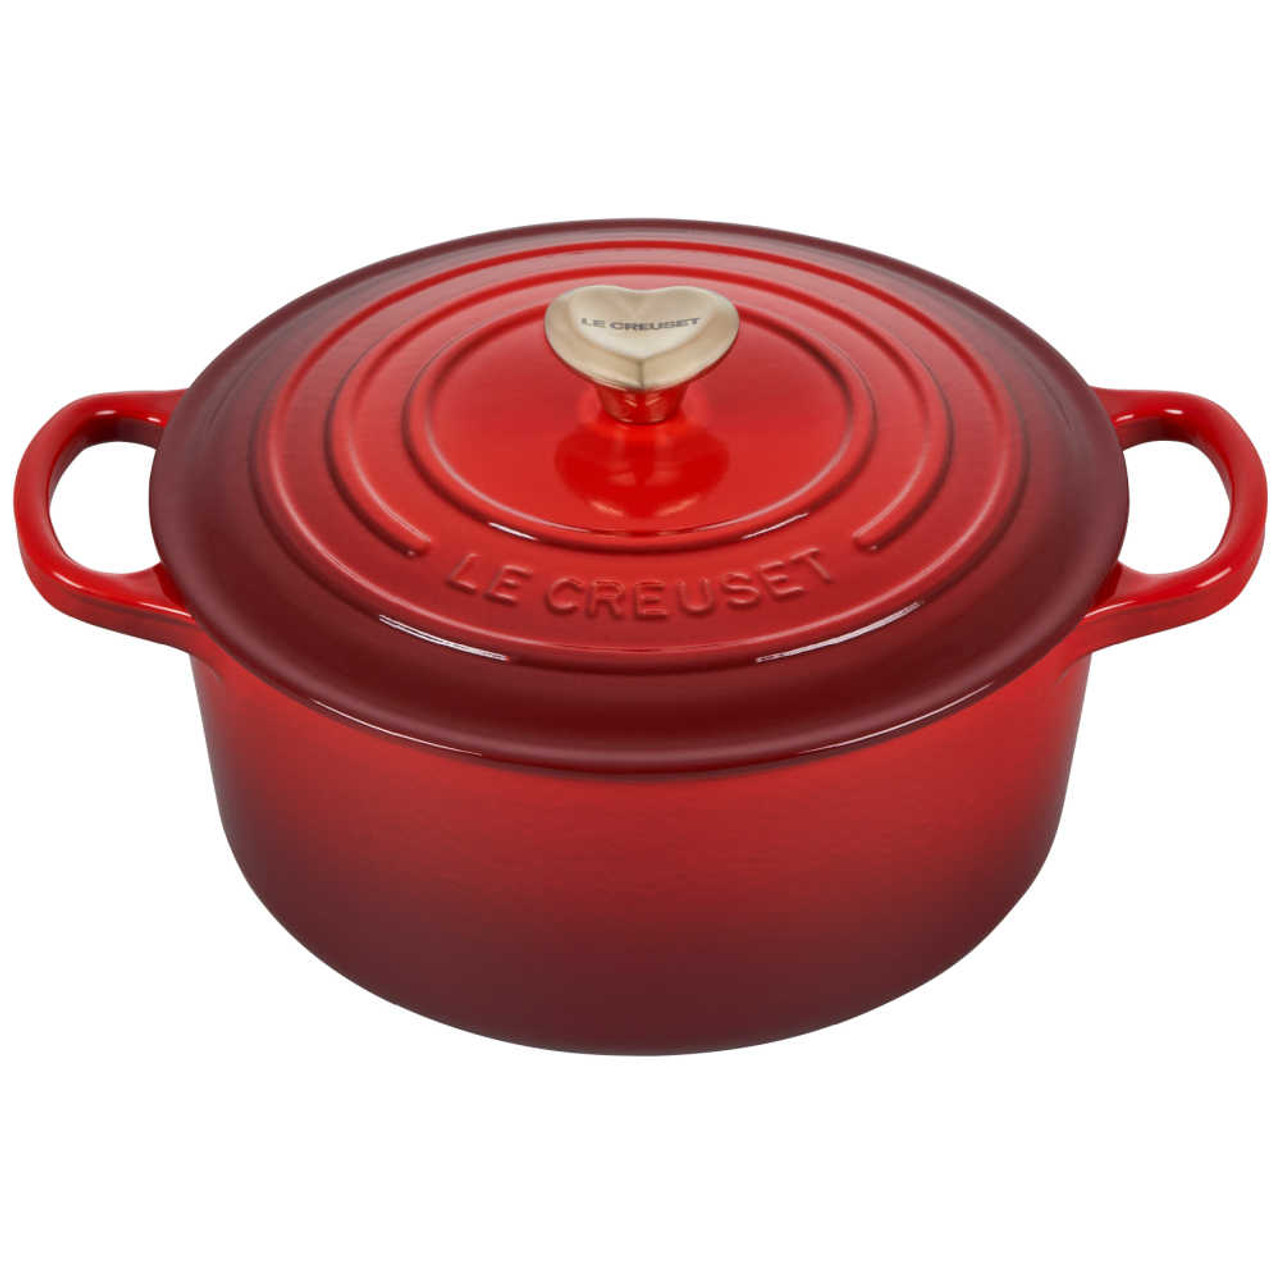 https://cdn11.bigcommerce.com/s-hccytny0od/images/stencil/1280x1280/products/3846/17485/Le_Creuset_Round_Dutch_Oven_With_Heart_Knob_Cerise__30913.1639442739.jpg?c=2?imbypass=on